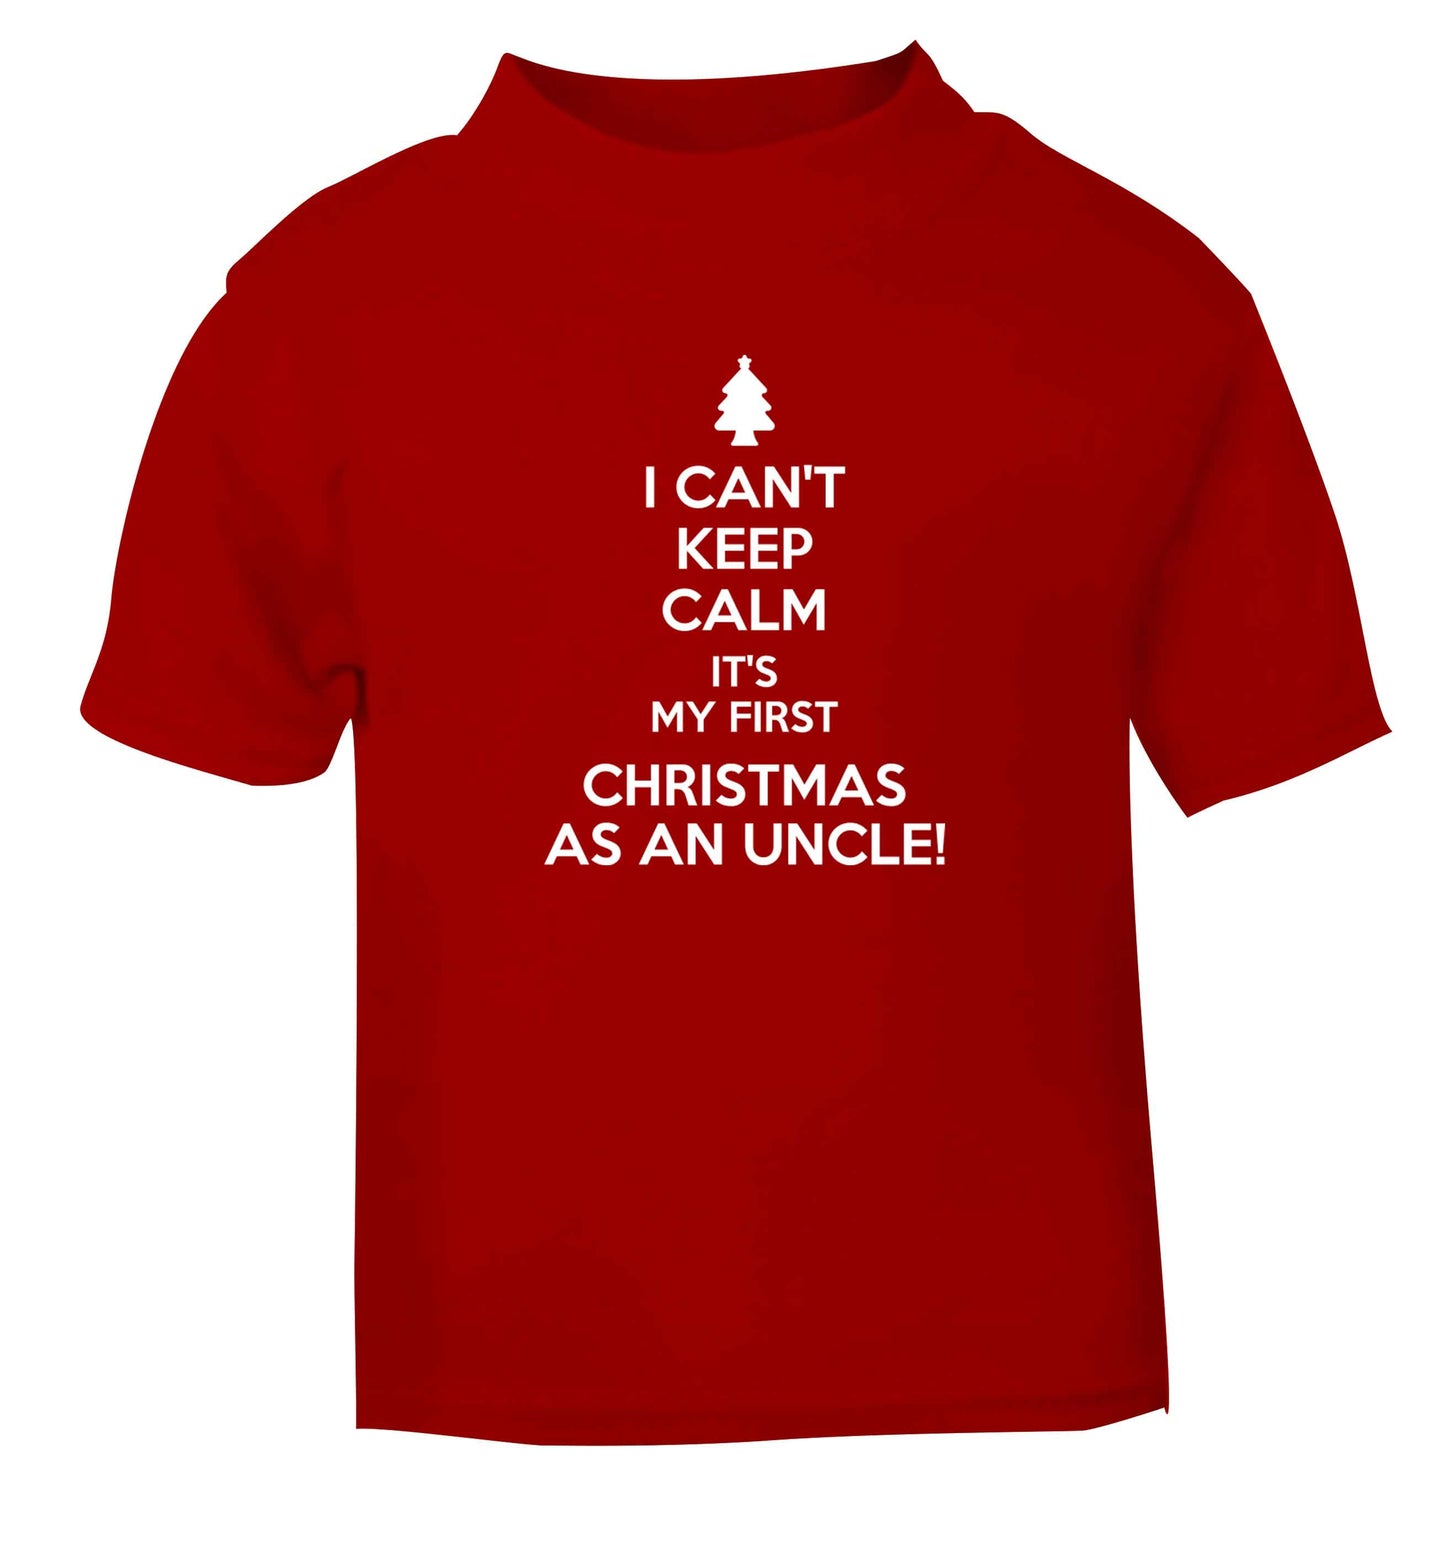 I can't keep calm it's my first Christmas as an uncle! red Baby Toddler Tshirt 2 Years